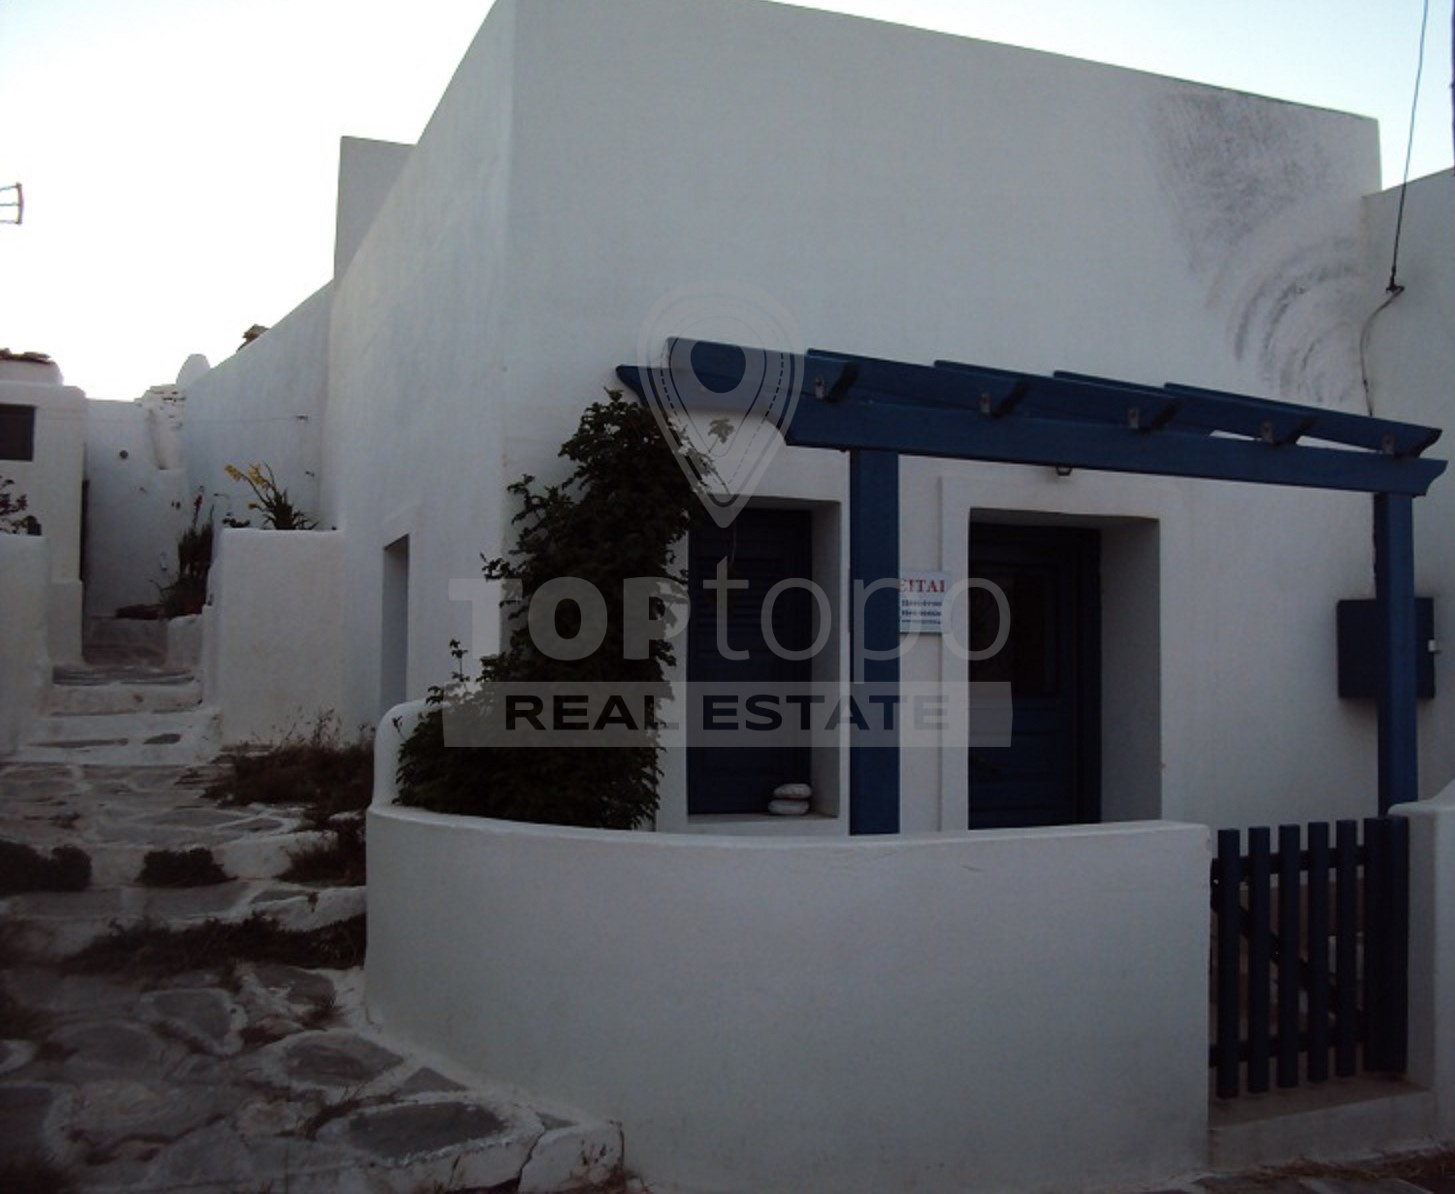 Sikinos island: New house with beautiful view at Chorio